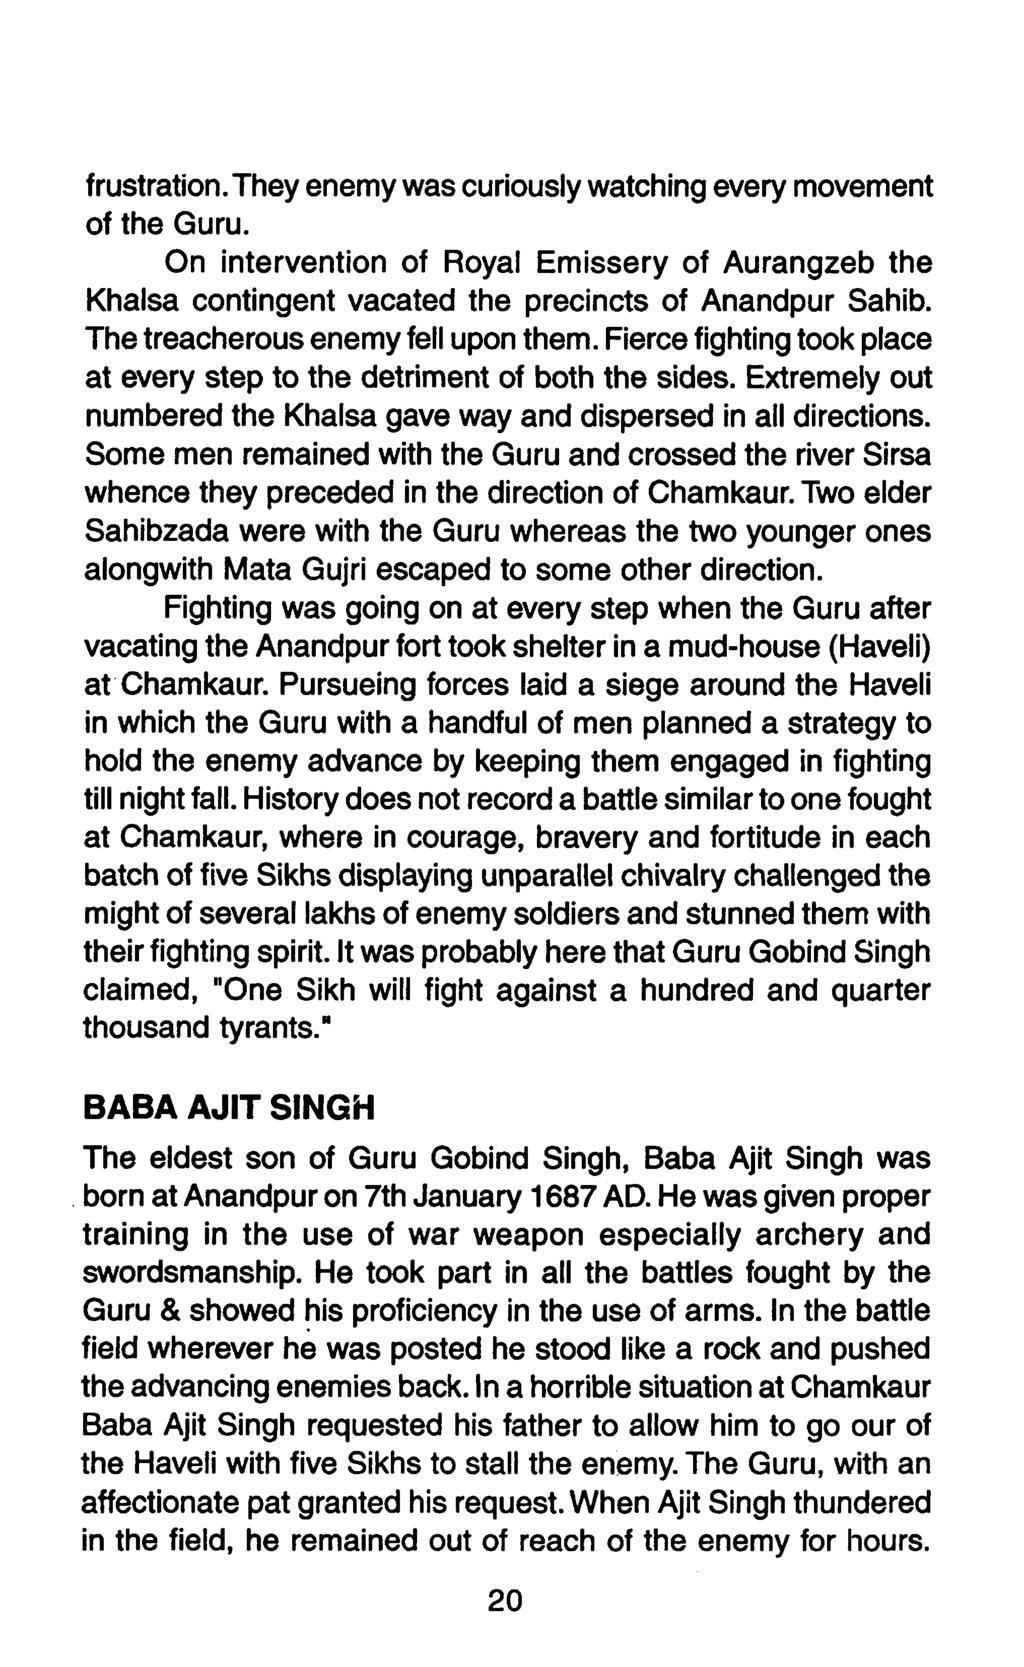 frustration. Theyenemywas curiouslywatching every movement of the Guru. On intervention of Royal Emissery of Aurangzeb the Khalsa contingent vacated the precincts of Anandpur Sahib.